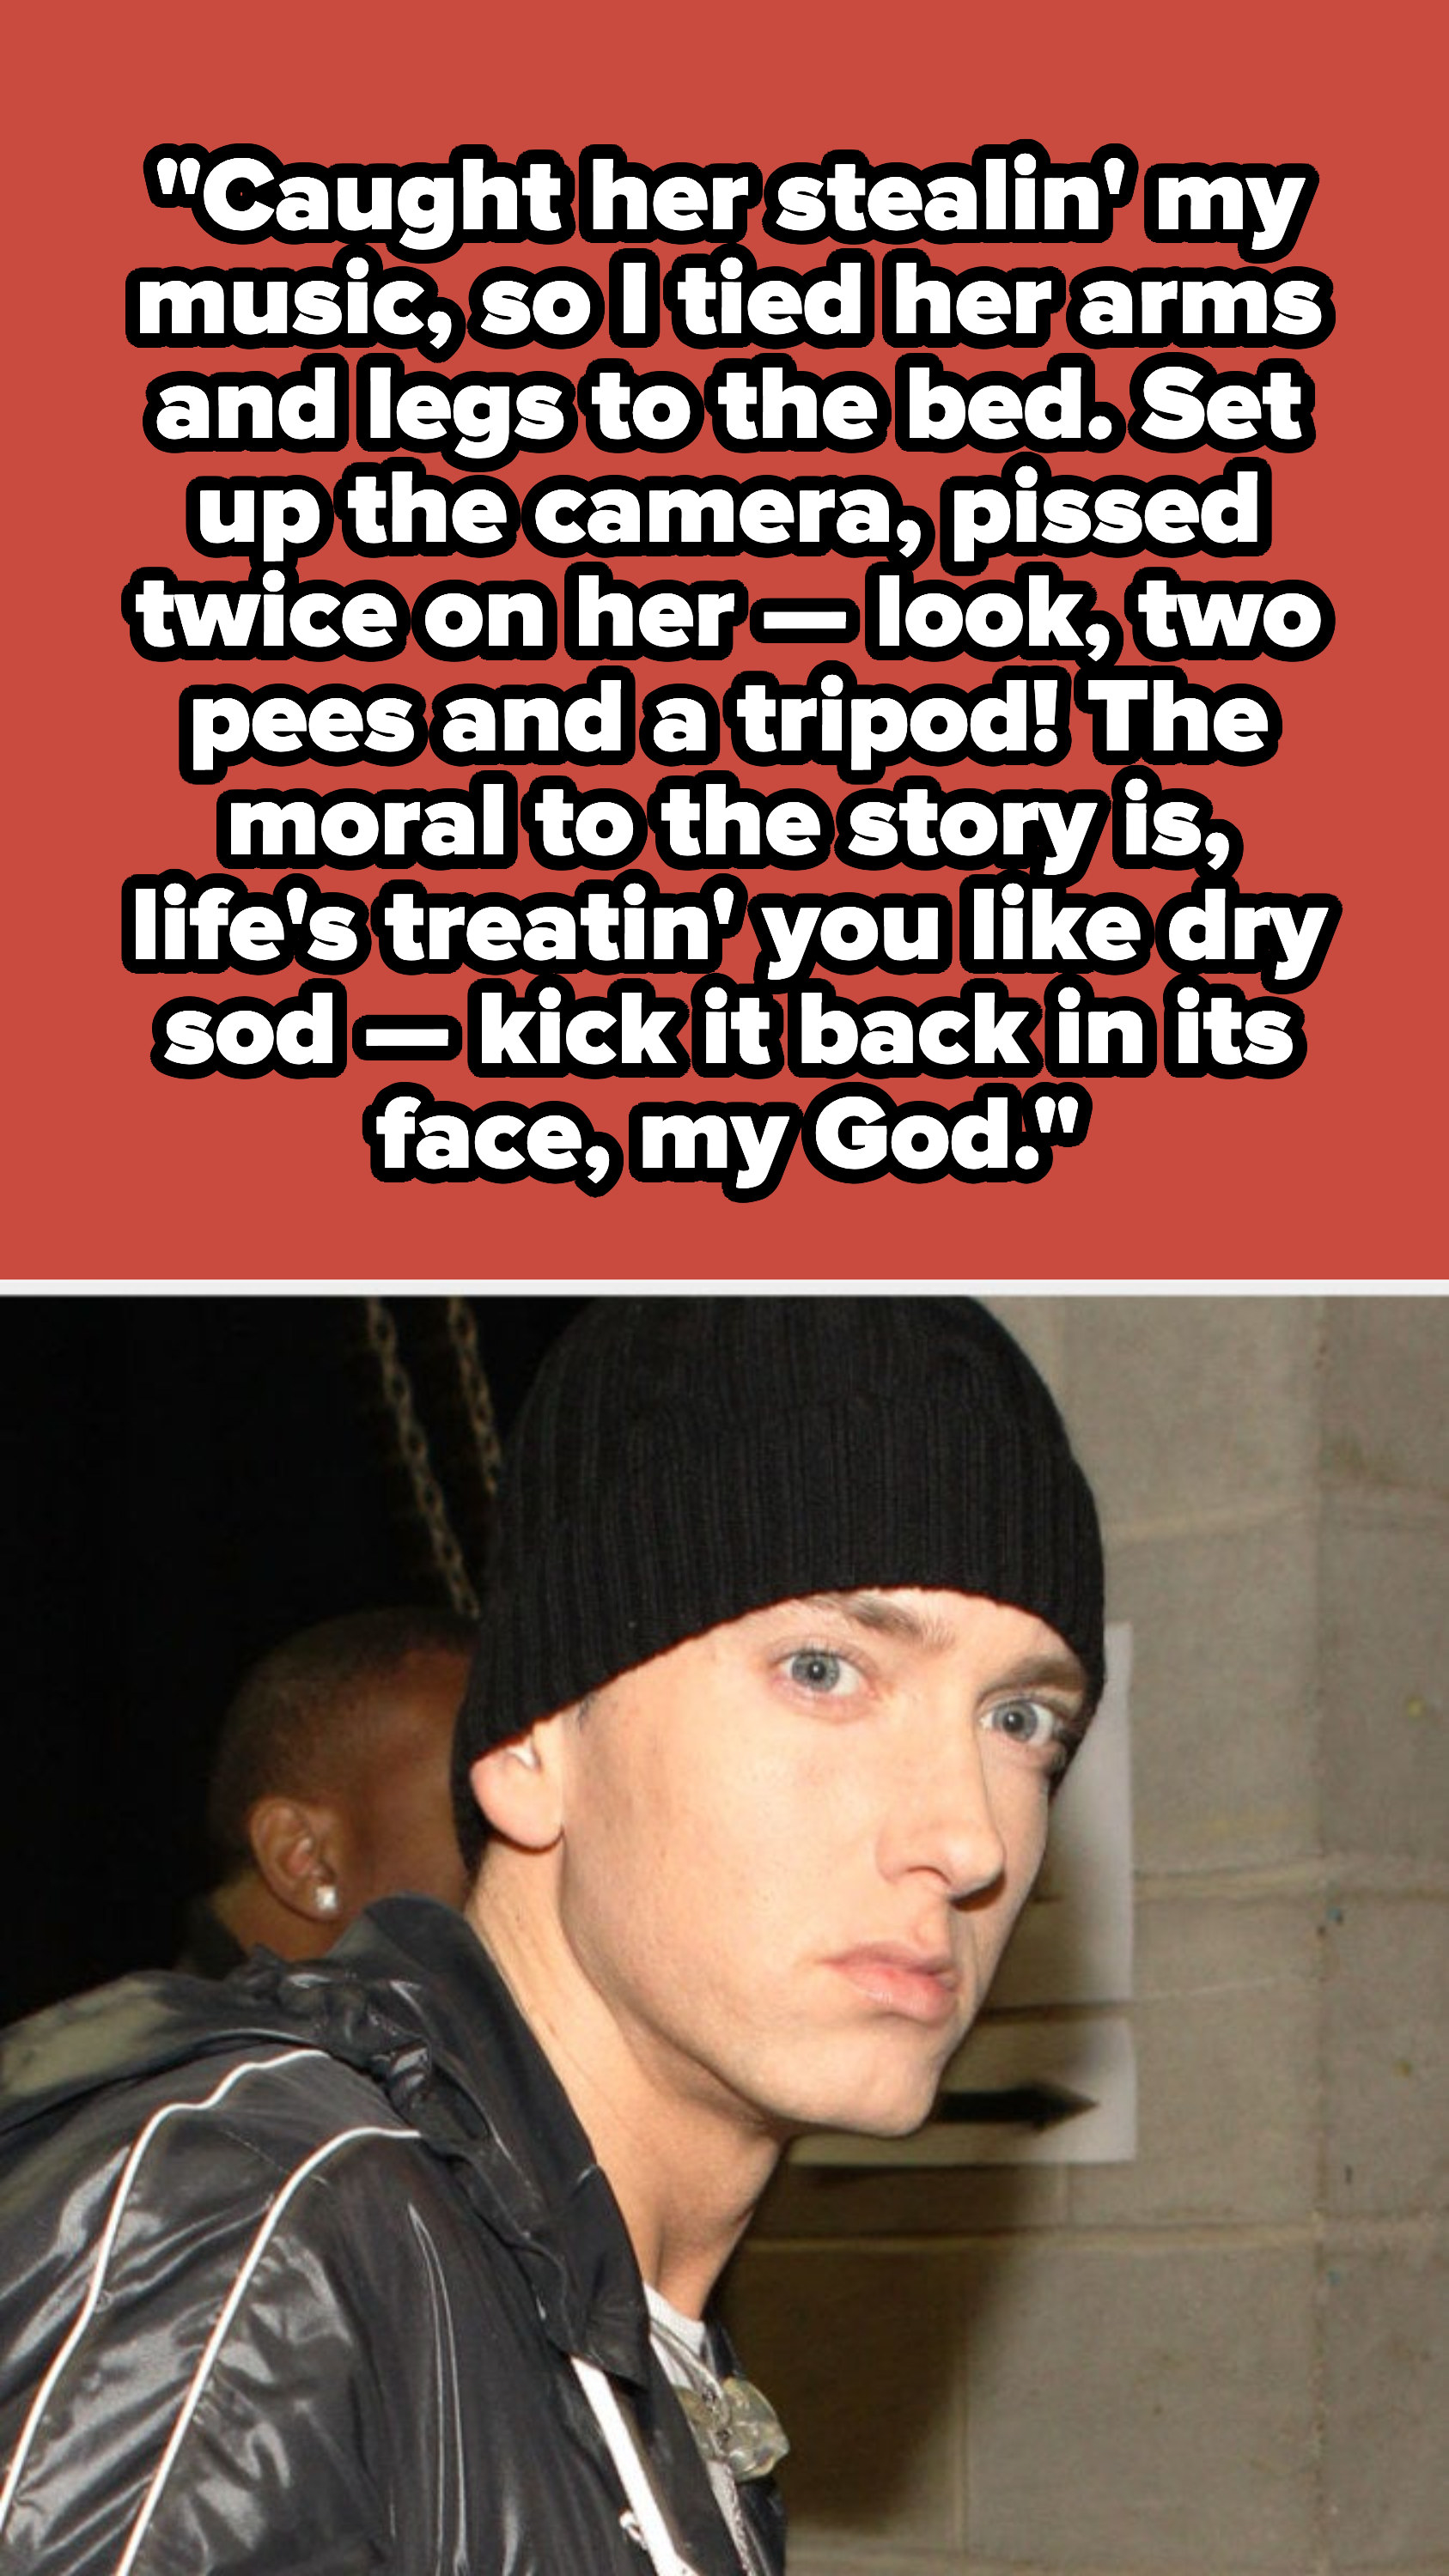 Eminem lyrics: &quot;Caught her stealin&#x27; my music, so I tied her arms and legs to the bed. Set up the camera, pissed twice on her — look, two pees and a tripod! The moral to the story is, life&#x27;s treatin&#x27; you like dry sod — kick it back in its face, my God&quot;